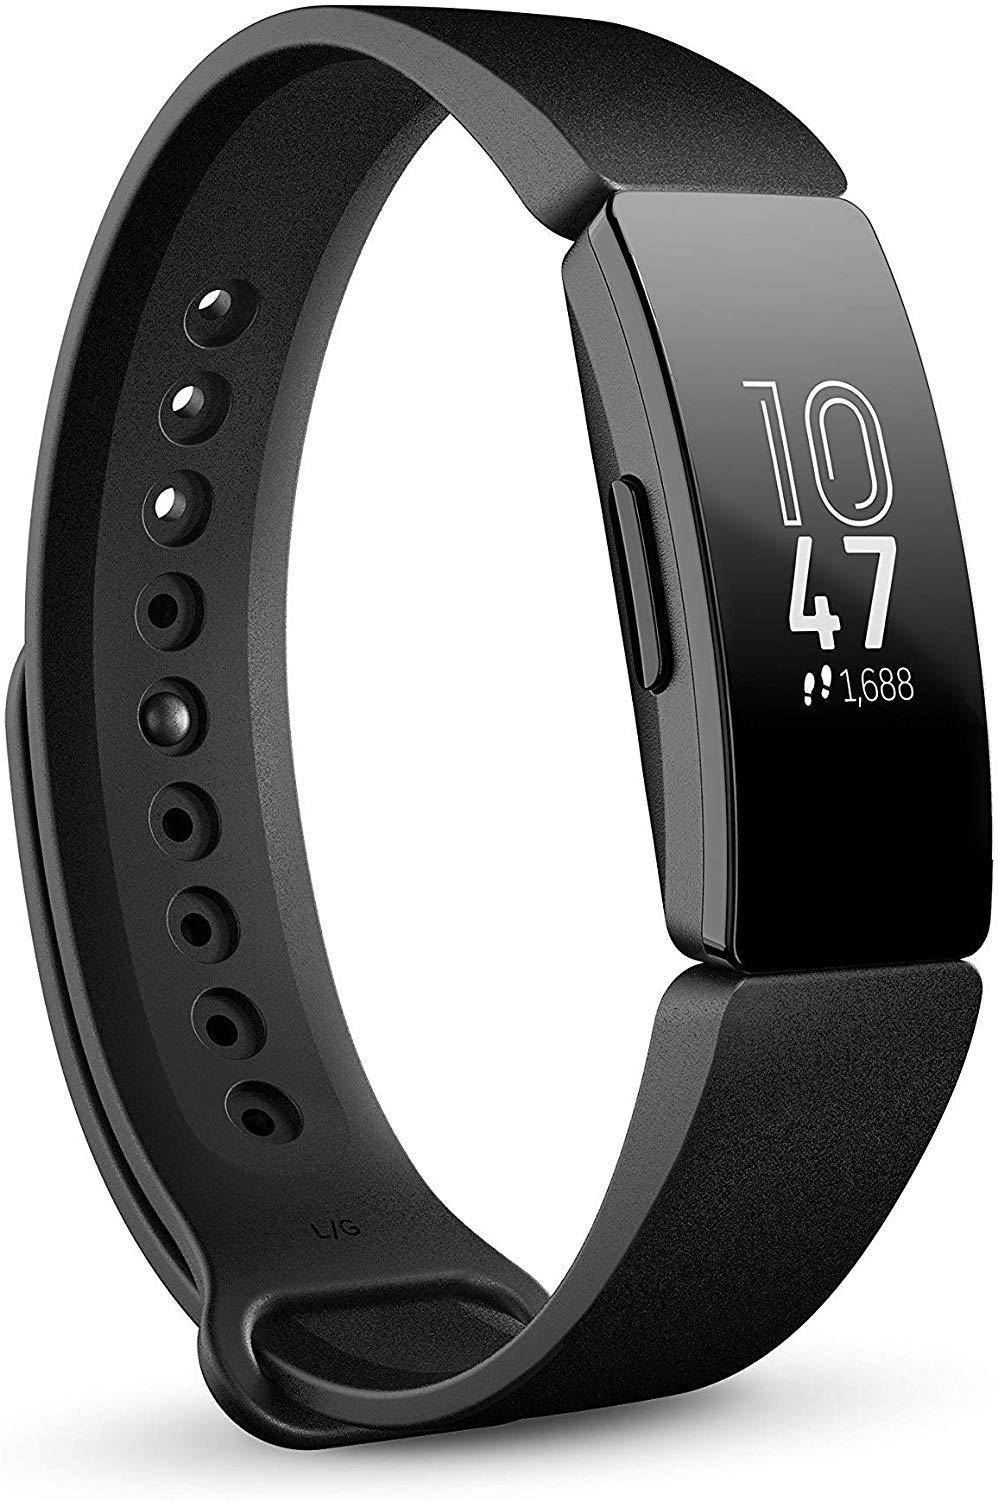 Fitbit Inspire Fitness and Health Tracker Smartband zoom image